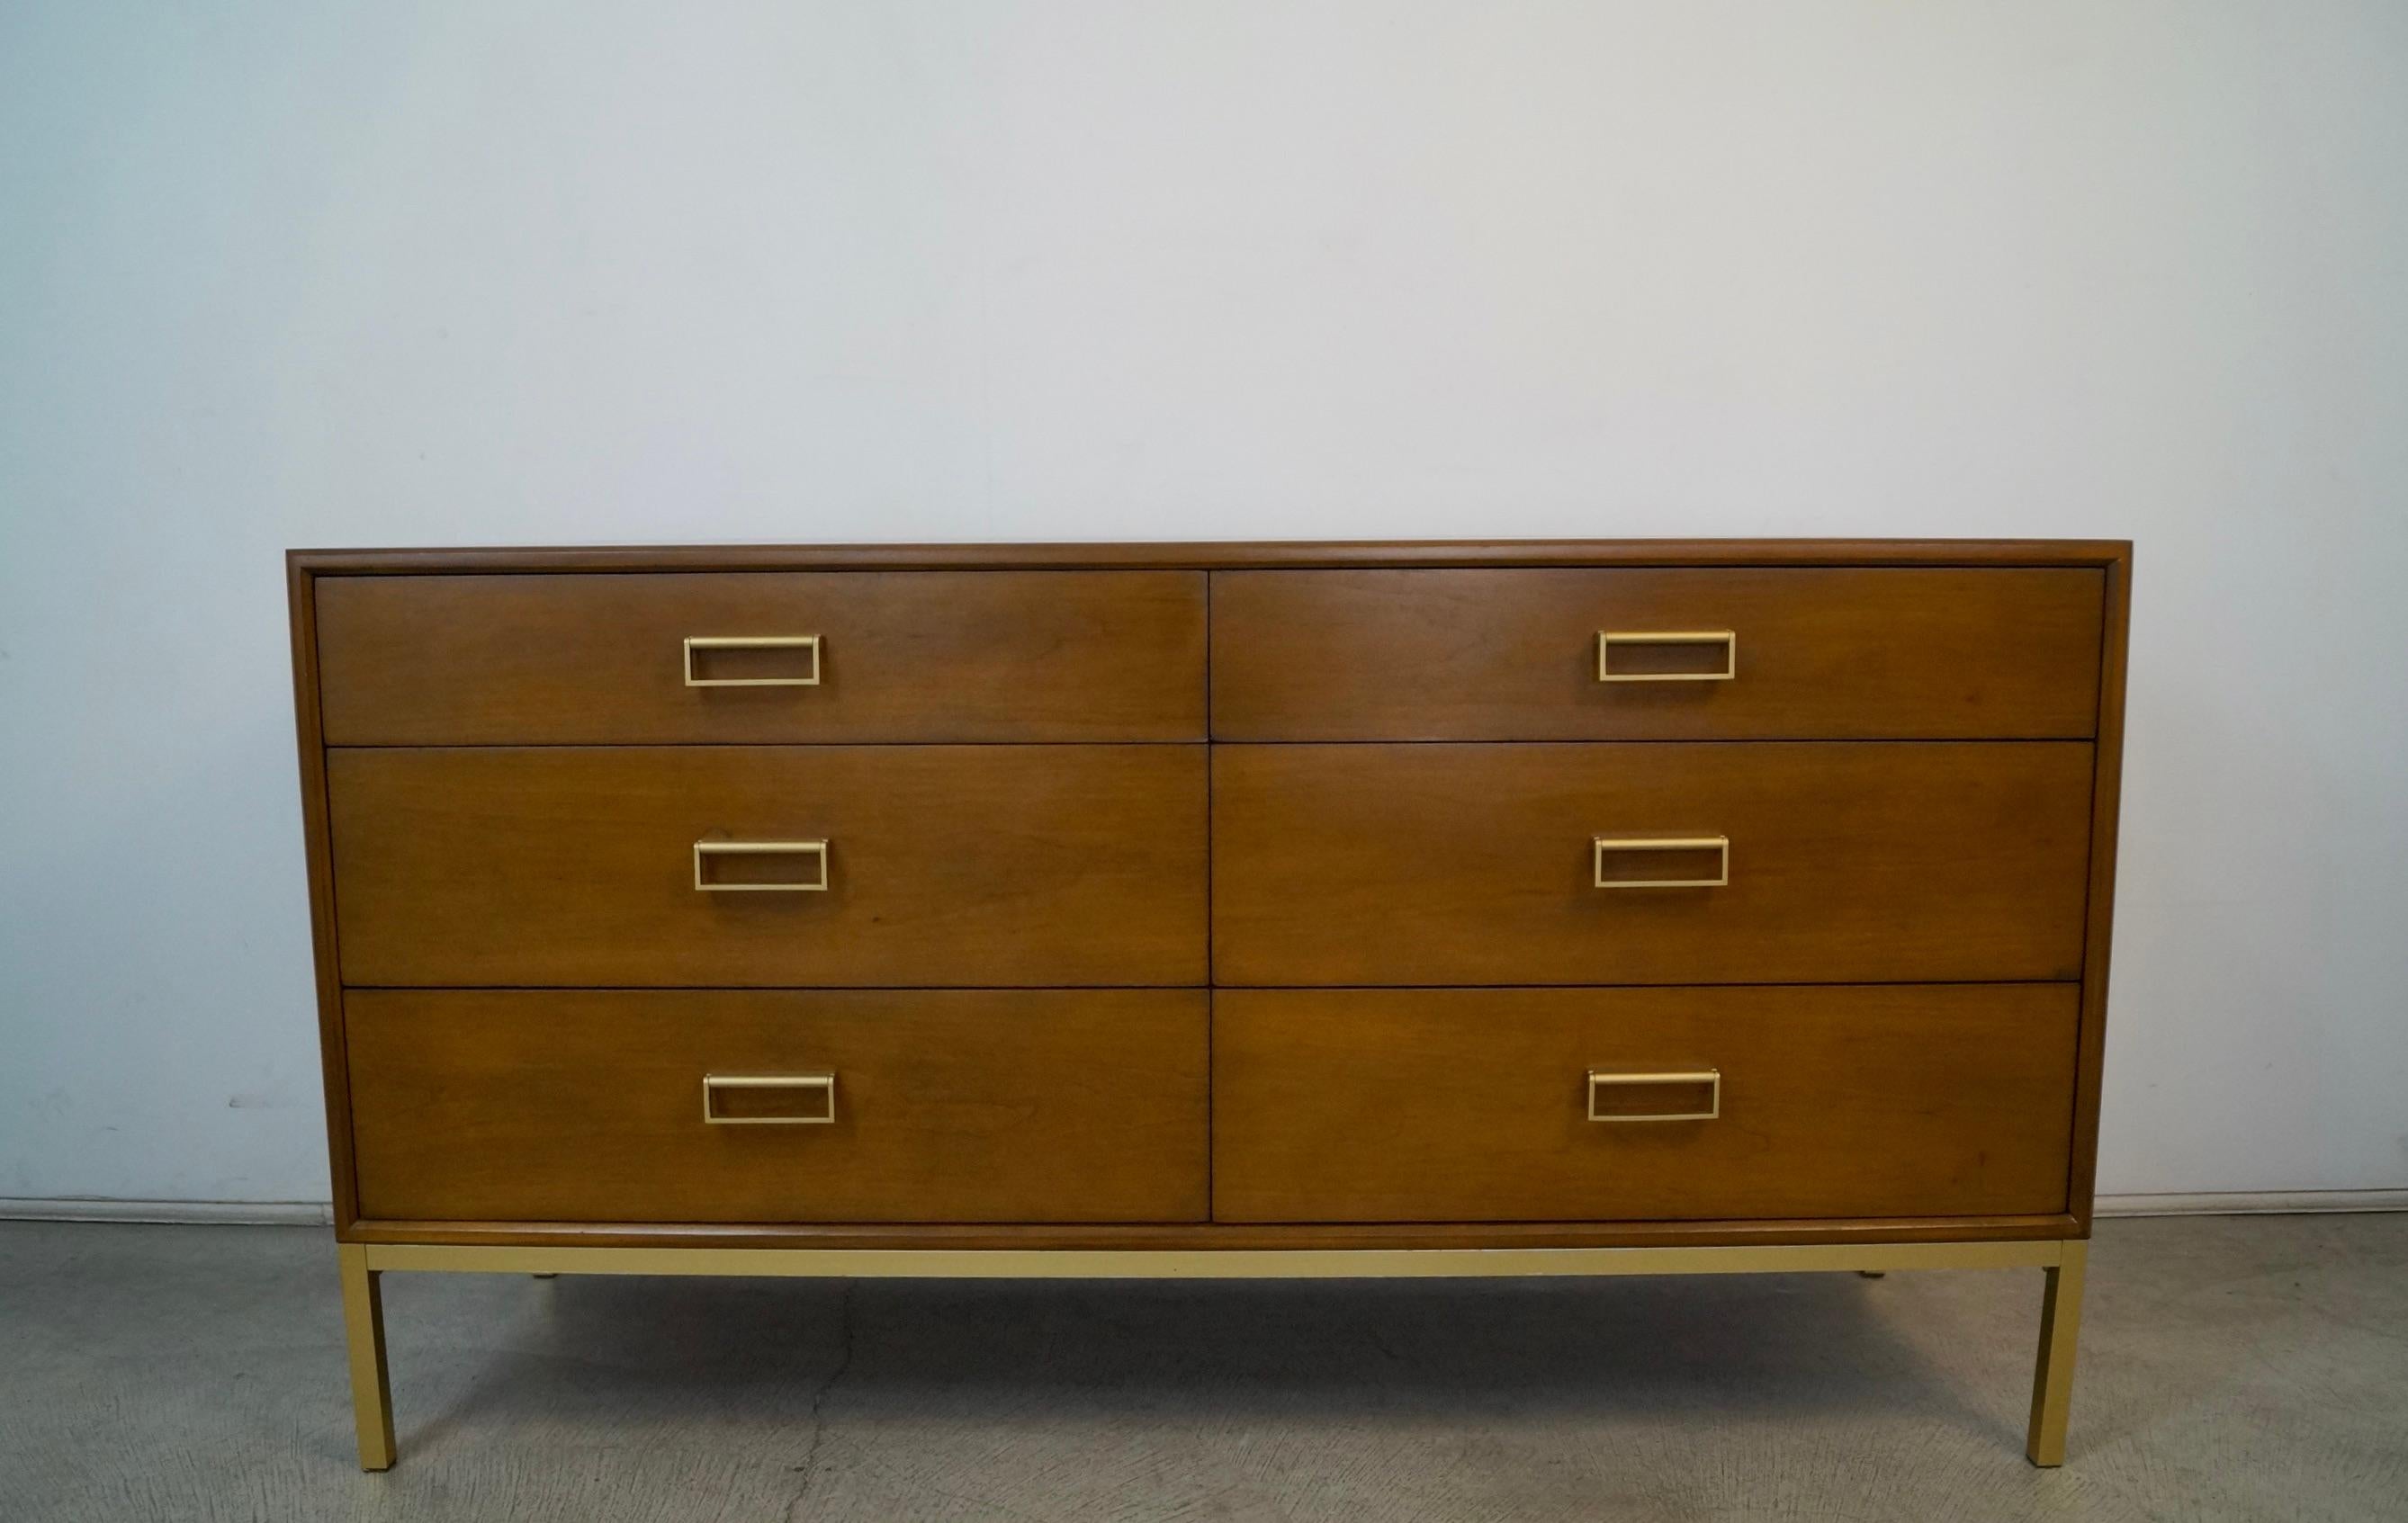 Vintage Mid-century Modern dresser for sale. It was designed by Kipp Stewart for Drexel in 1959, and is part of the 